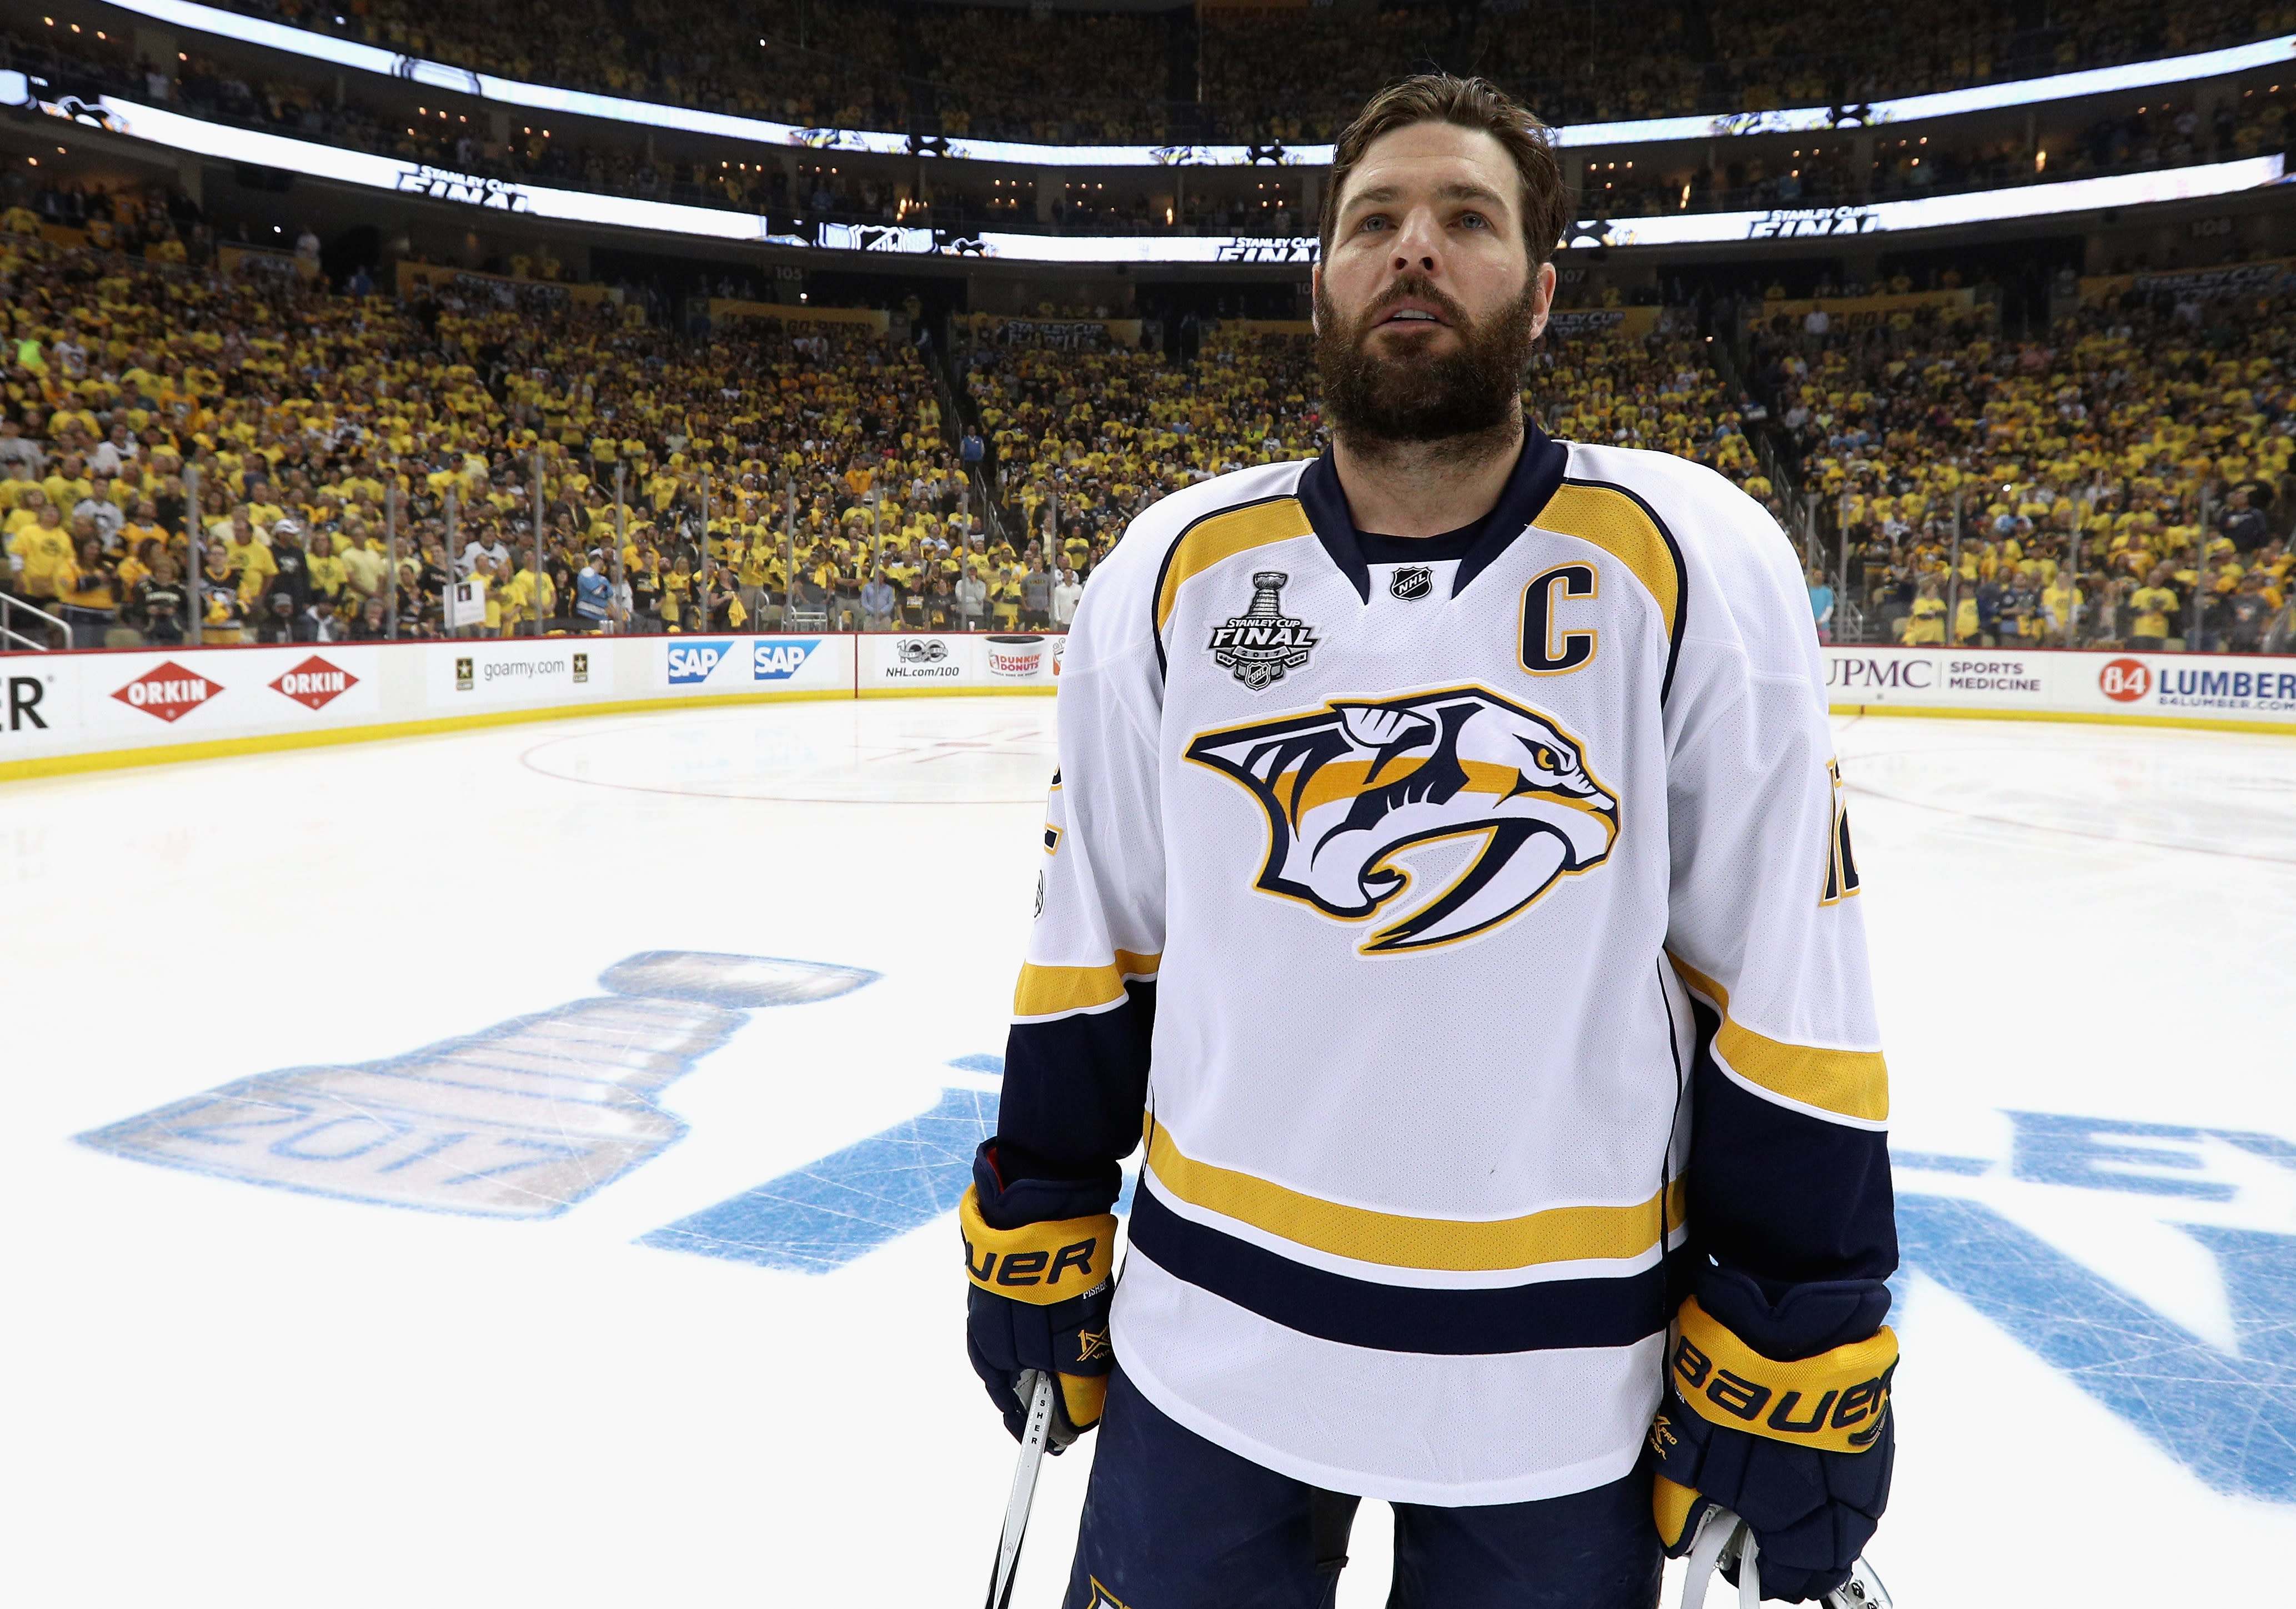 Mike Fisher retires with godly letter 